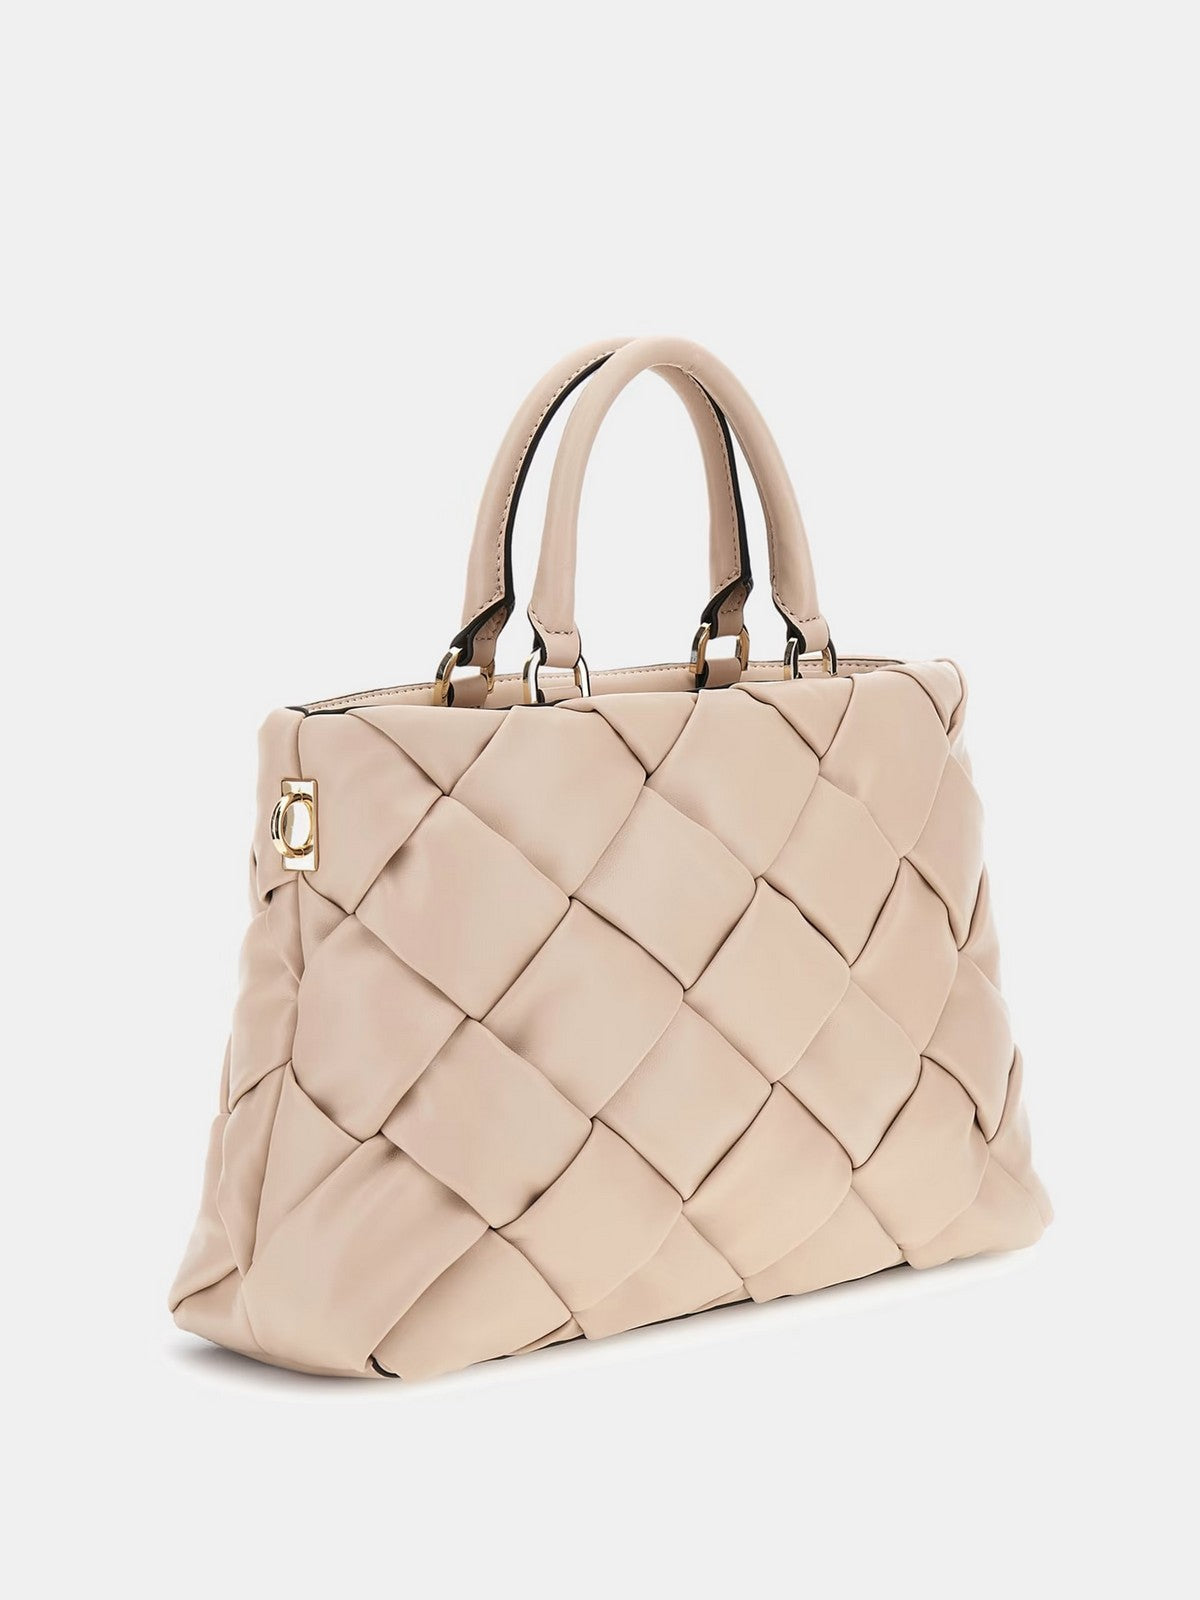 Sac pour femmes GUESS HWWG89 86060 STO Beige